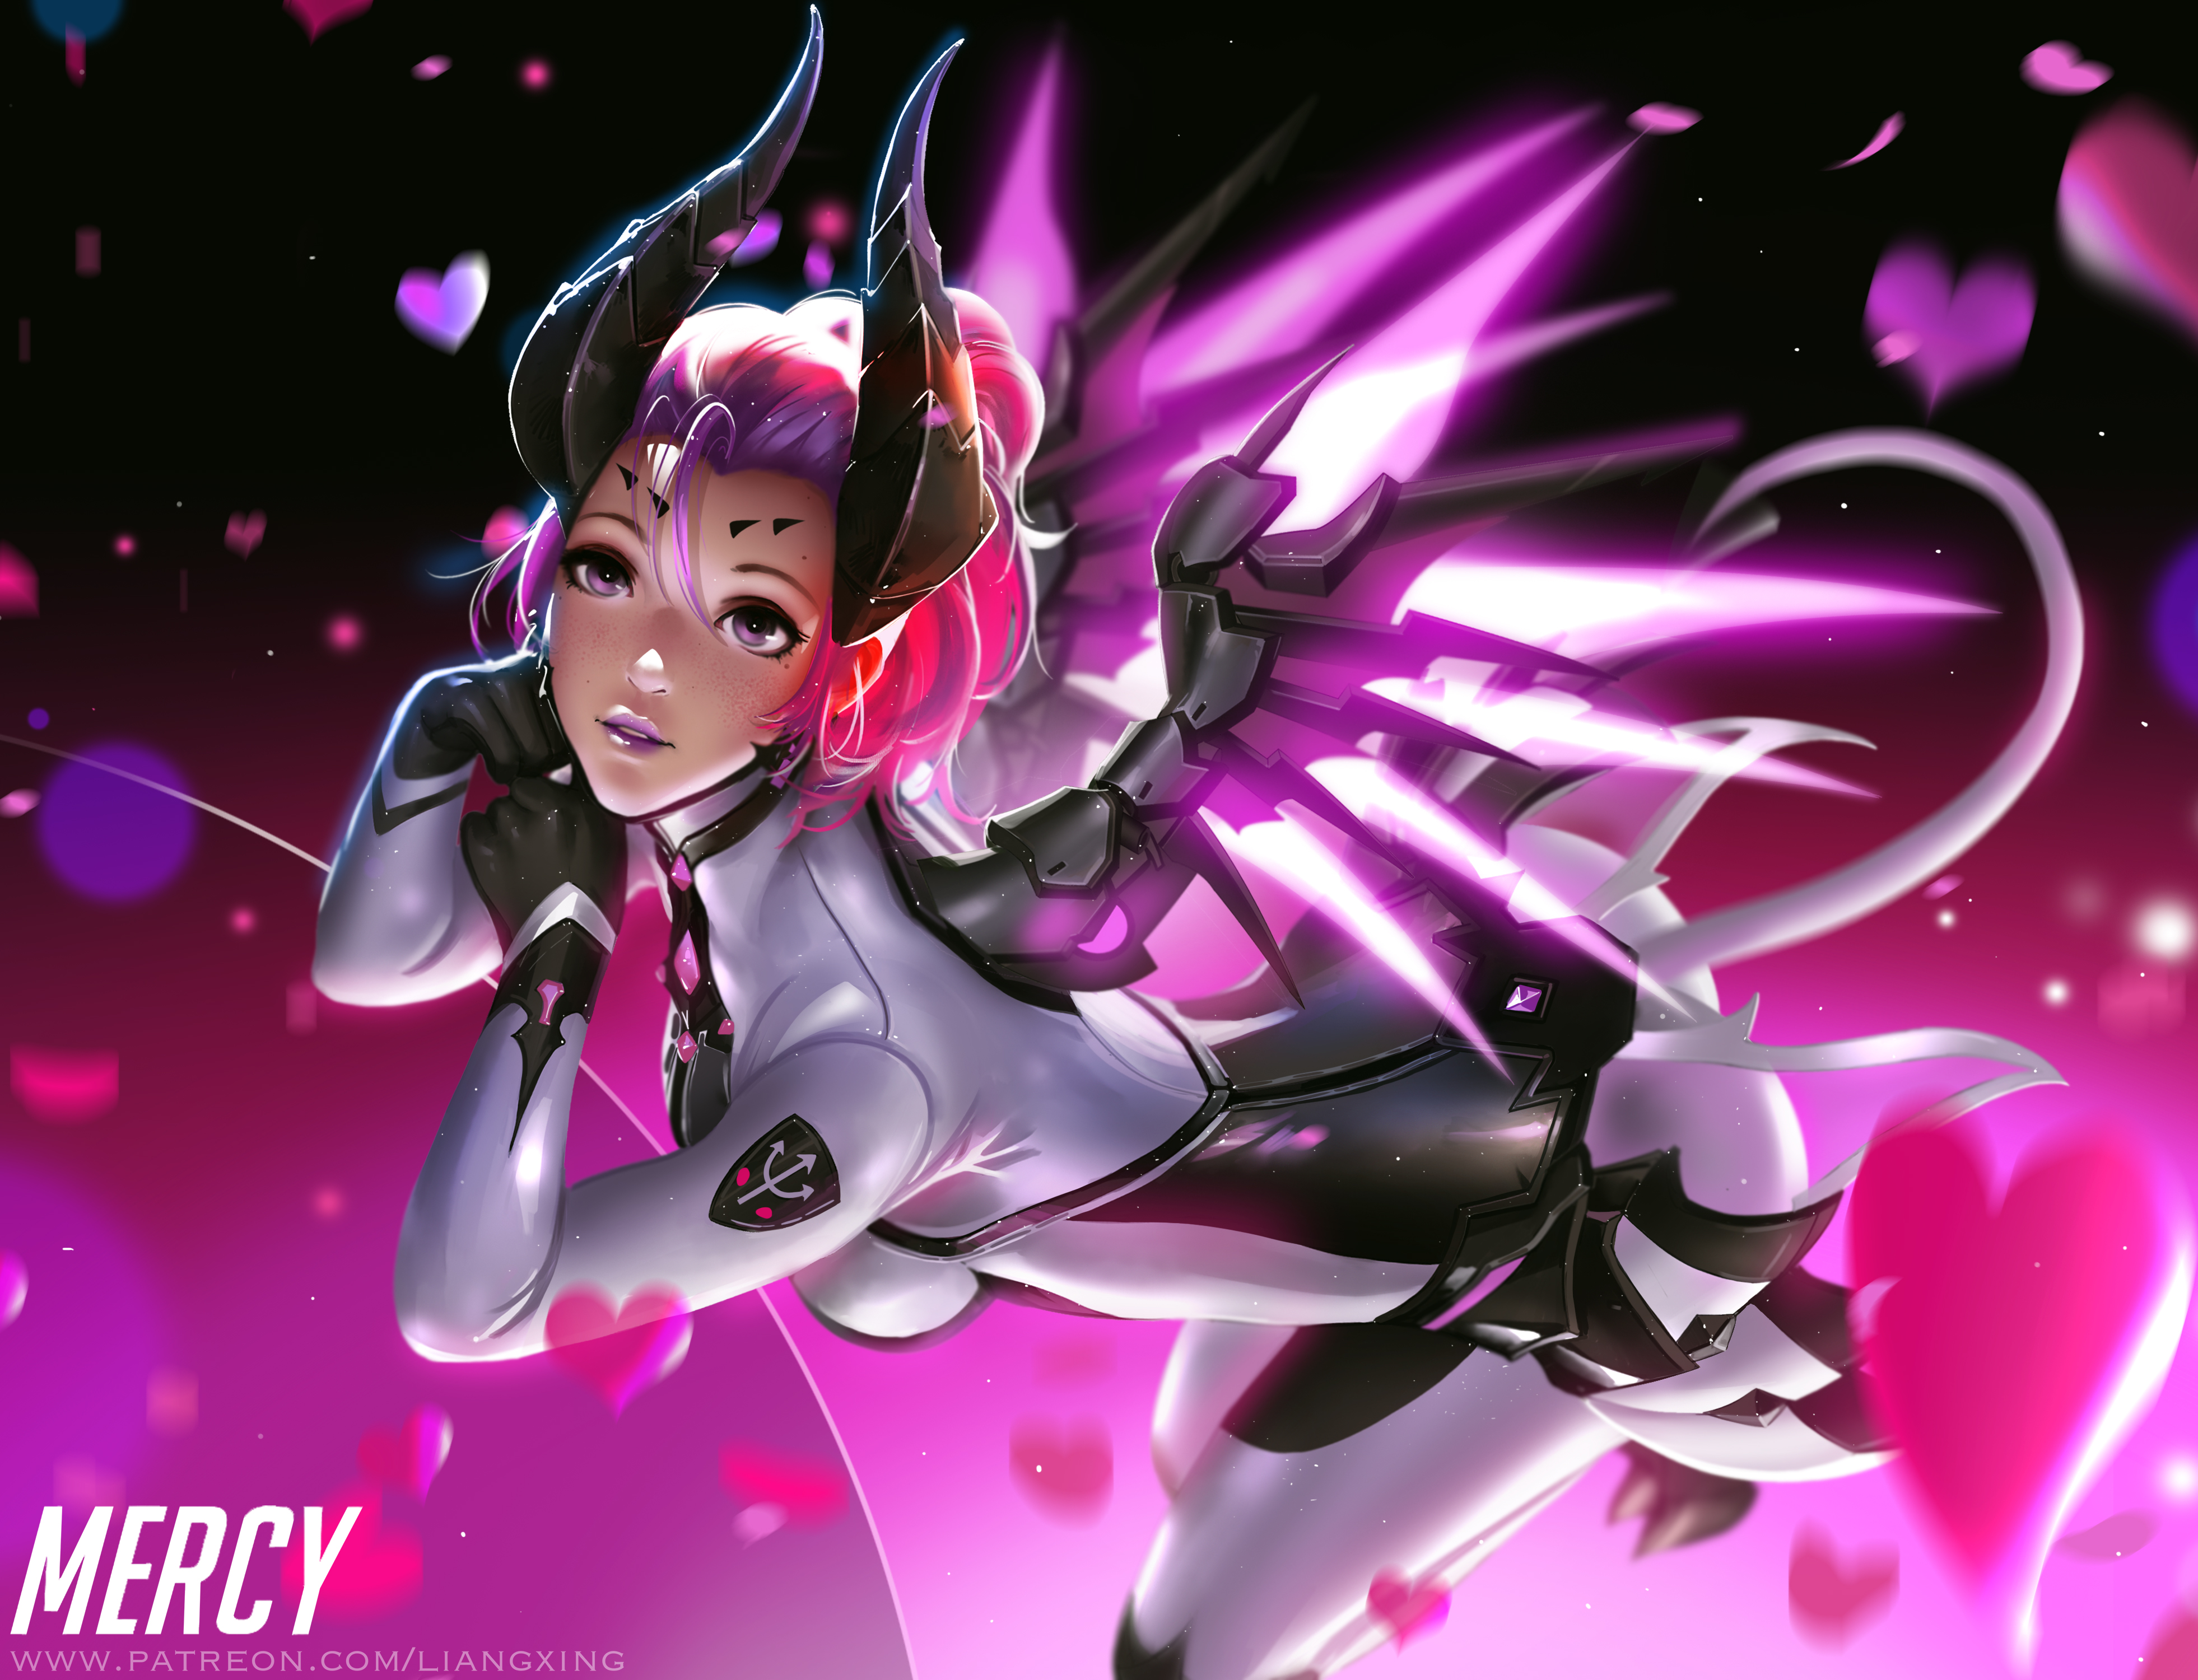 Mercy Overwatch Overwatch Video Games Video Game Girls Video Game Characters Wings Glowing Tail Horn 3924x3000